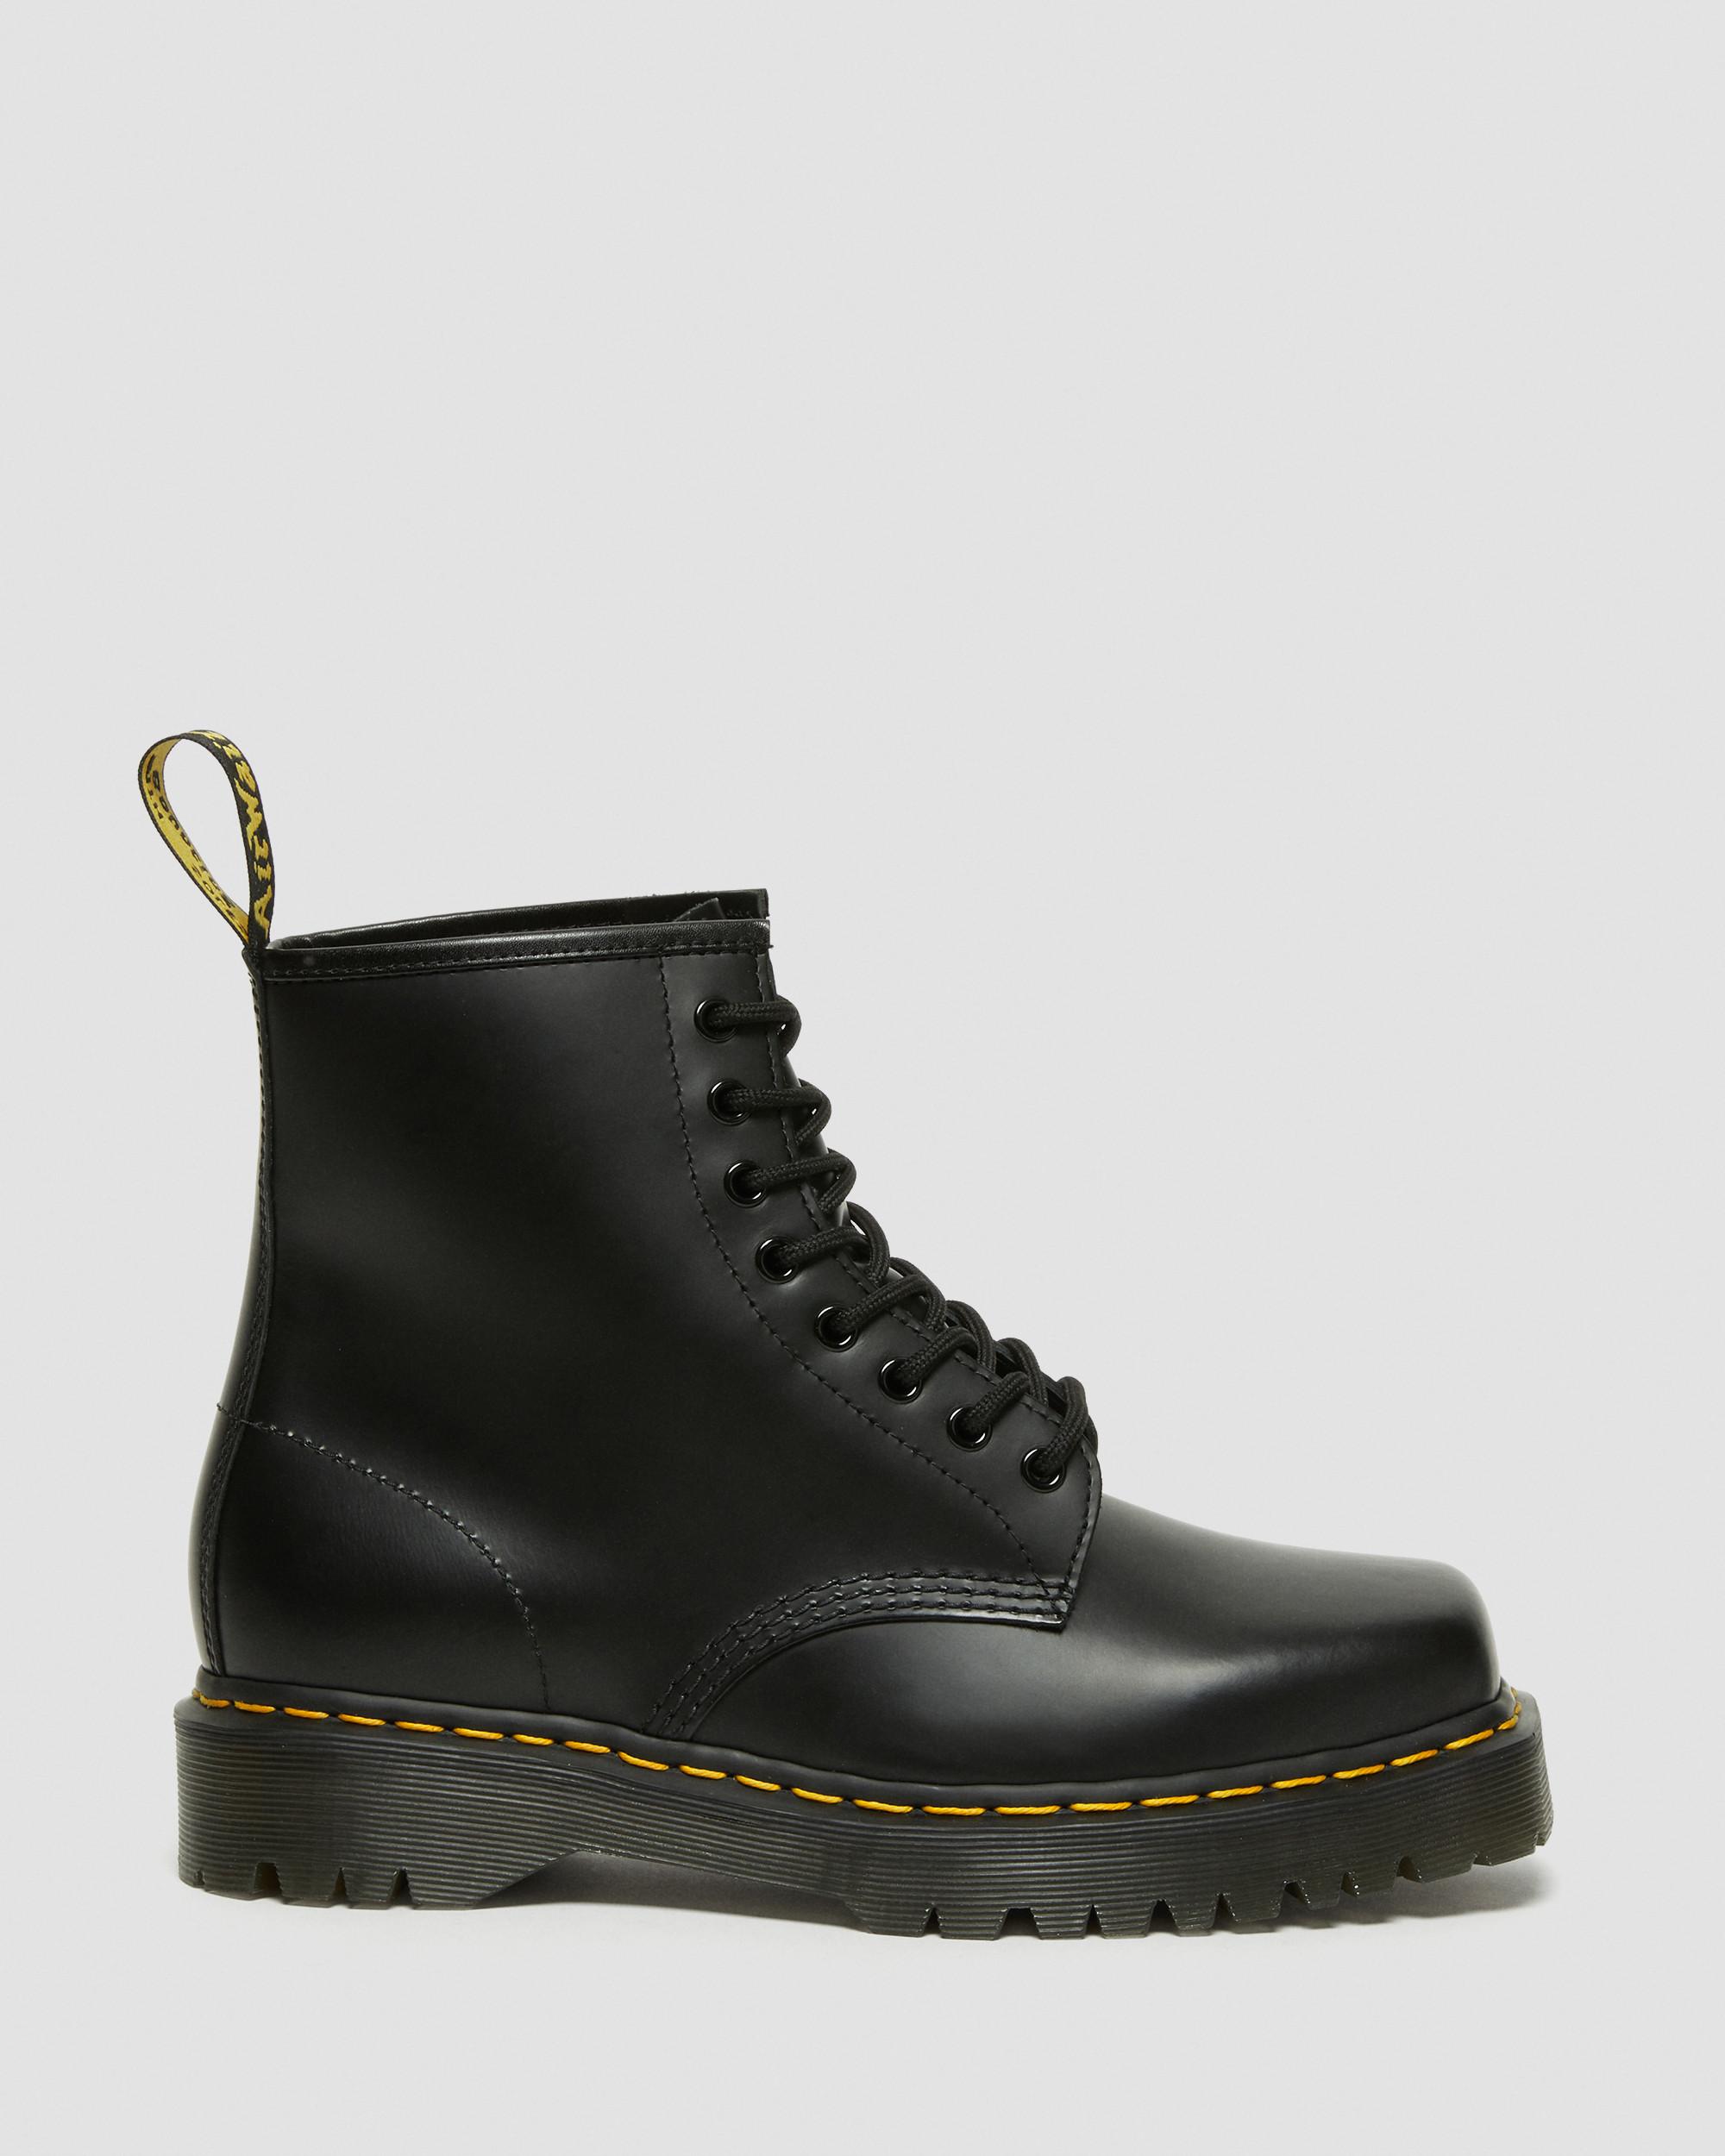 1460 Bex Squared Toe Leather Lace Up Boots in Black | Dr. Martens